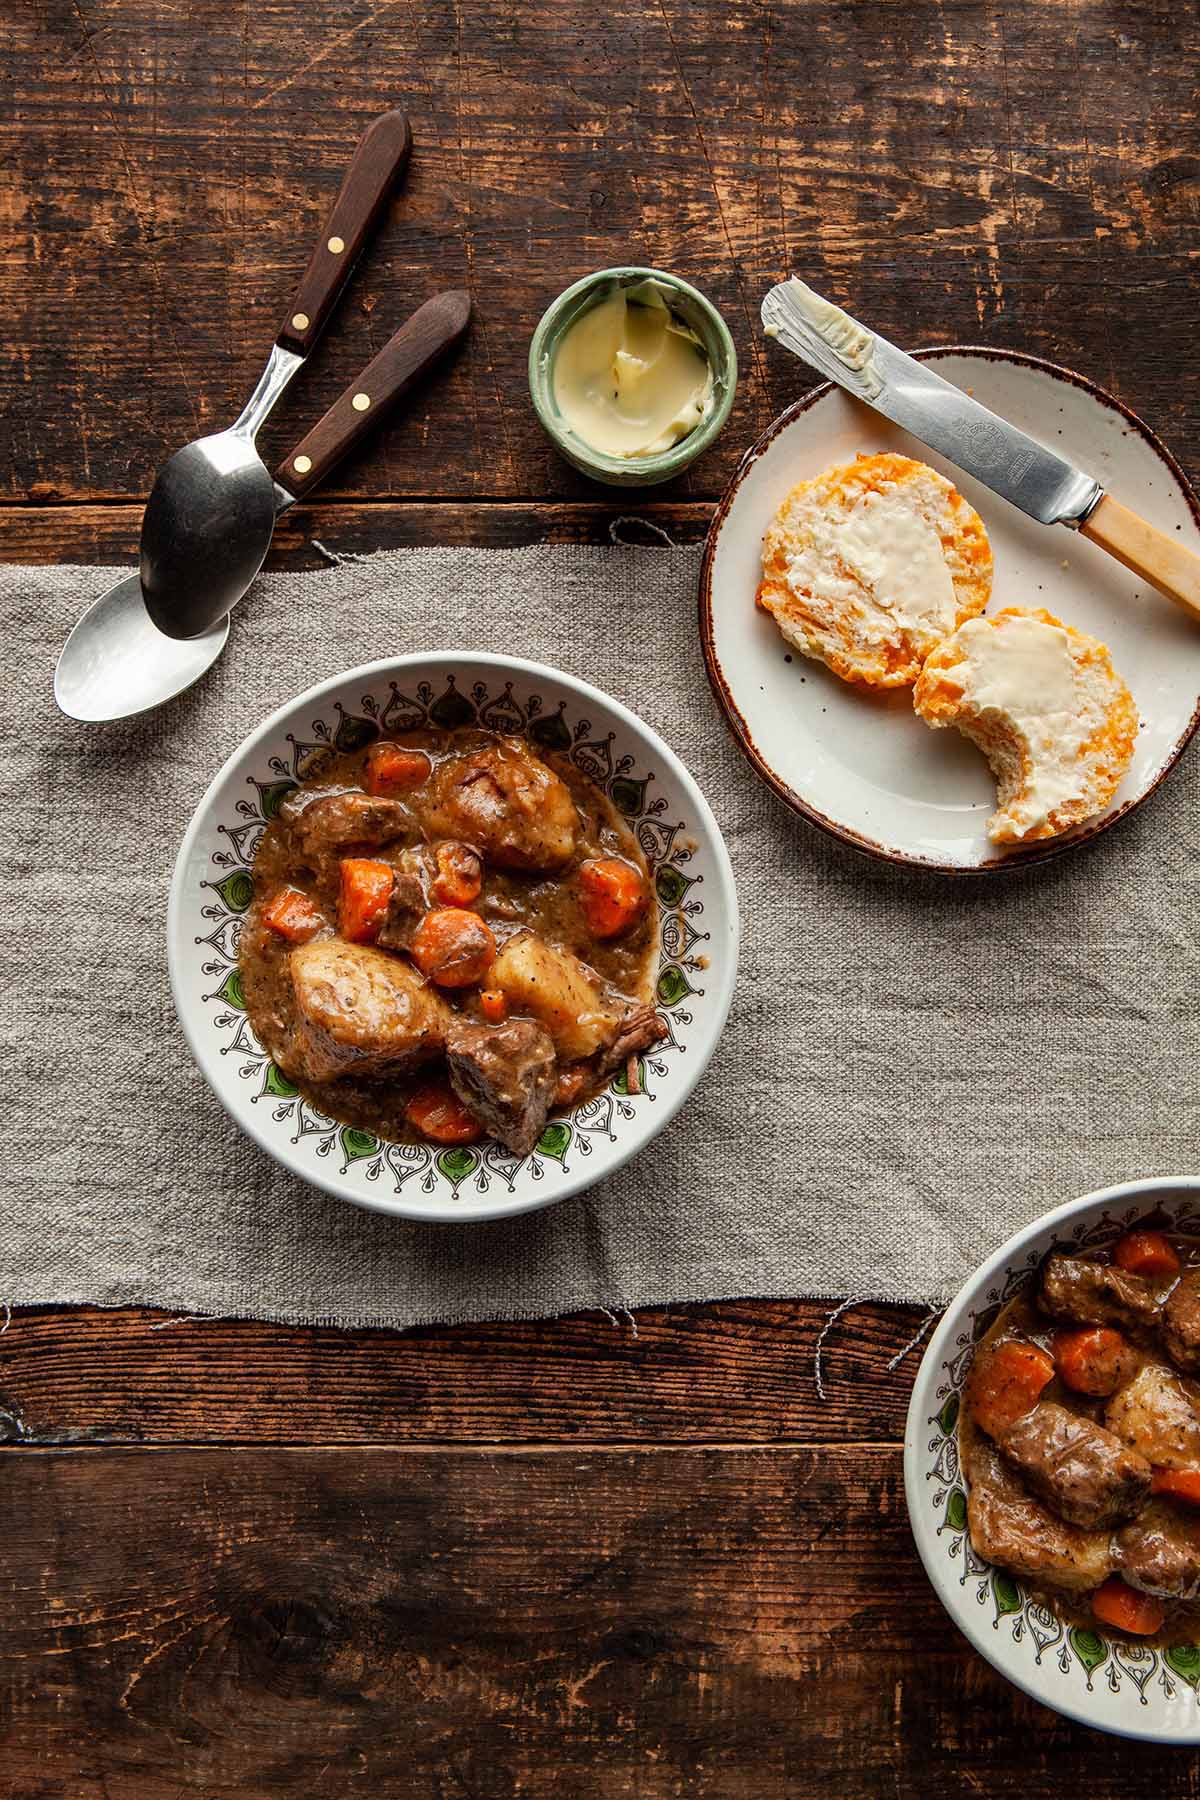 Two bowls of Dutch oven beef stew on a wood table. A small dish of butter and a cheese biscuit, split in half and buttered, with one bite taken, on a plate nearby.